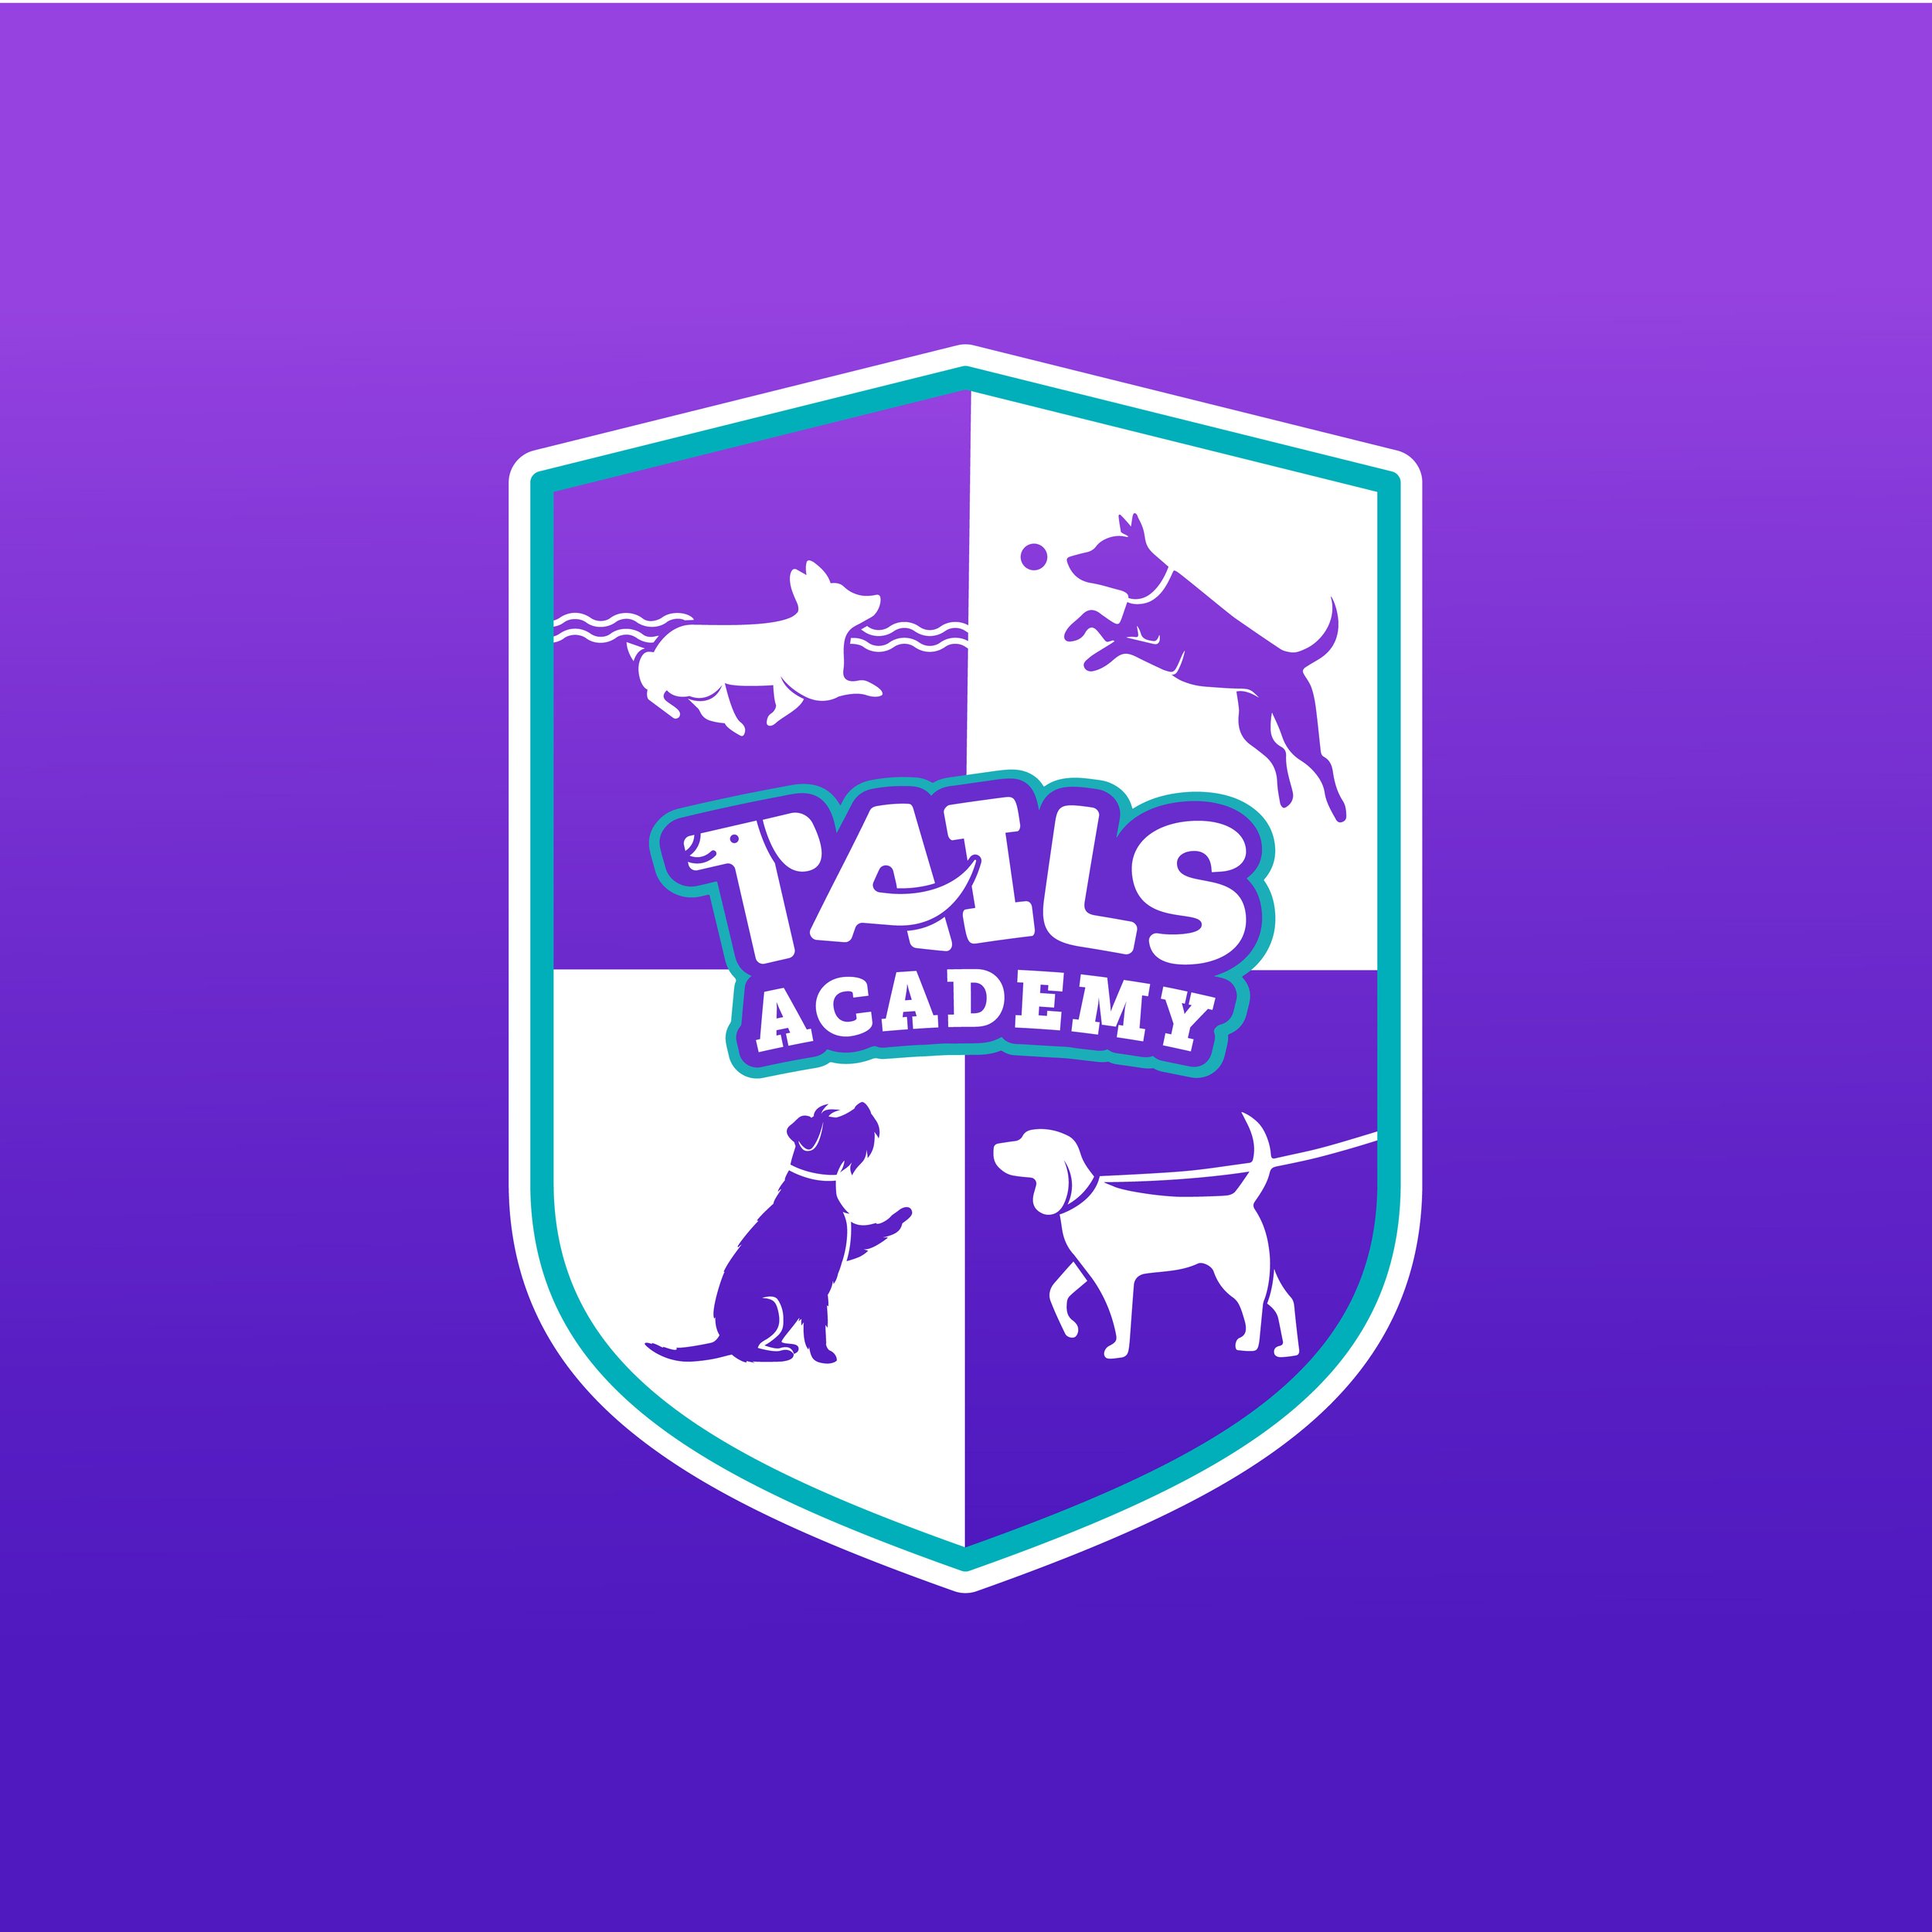 Tails Academy for IG-03.jpg